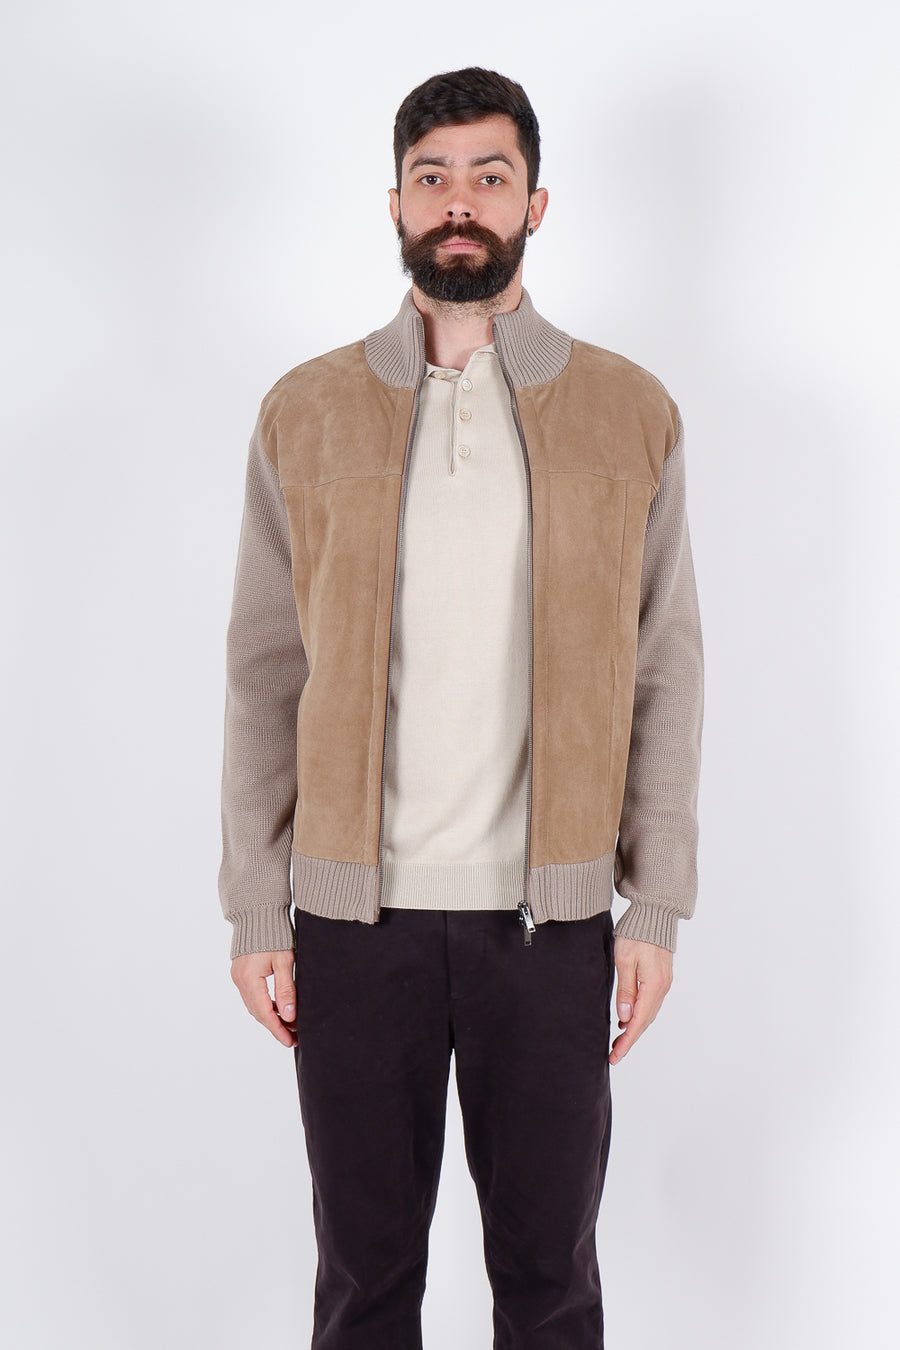 Buy the Daniele Fiesoli Zip-Up Knitted Suede Bomber Taupe at Intro. Spend £50 for free UK delivery. Official stockists. We ship worldwide.